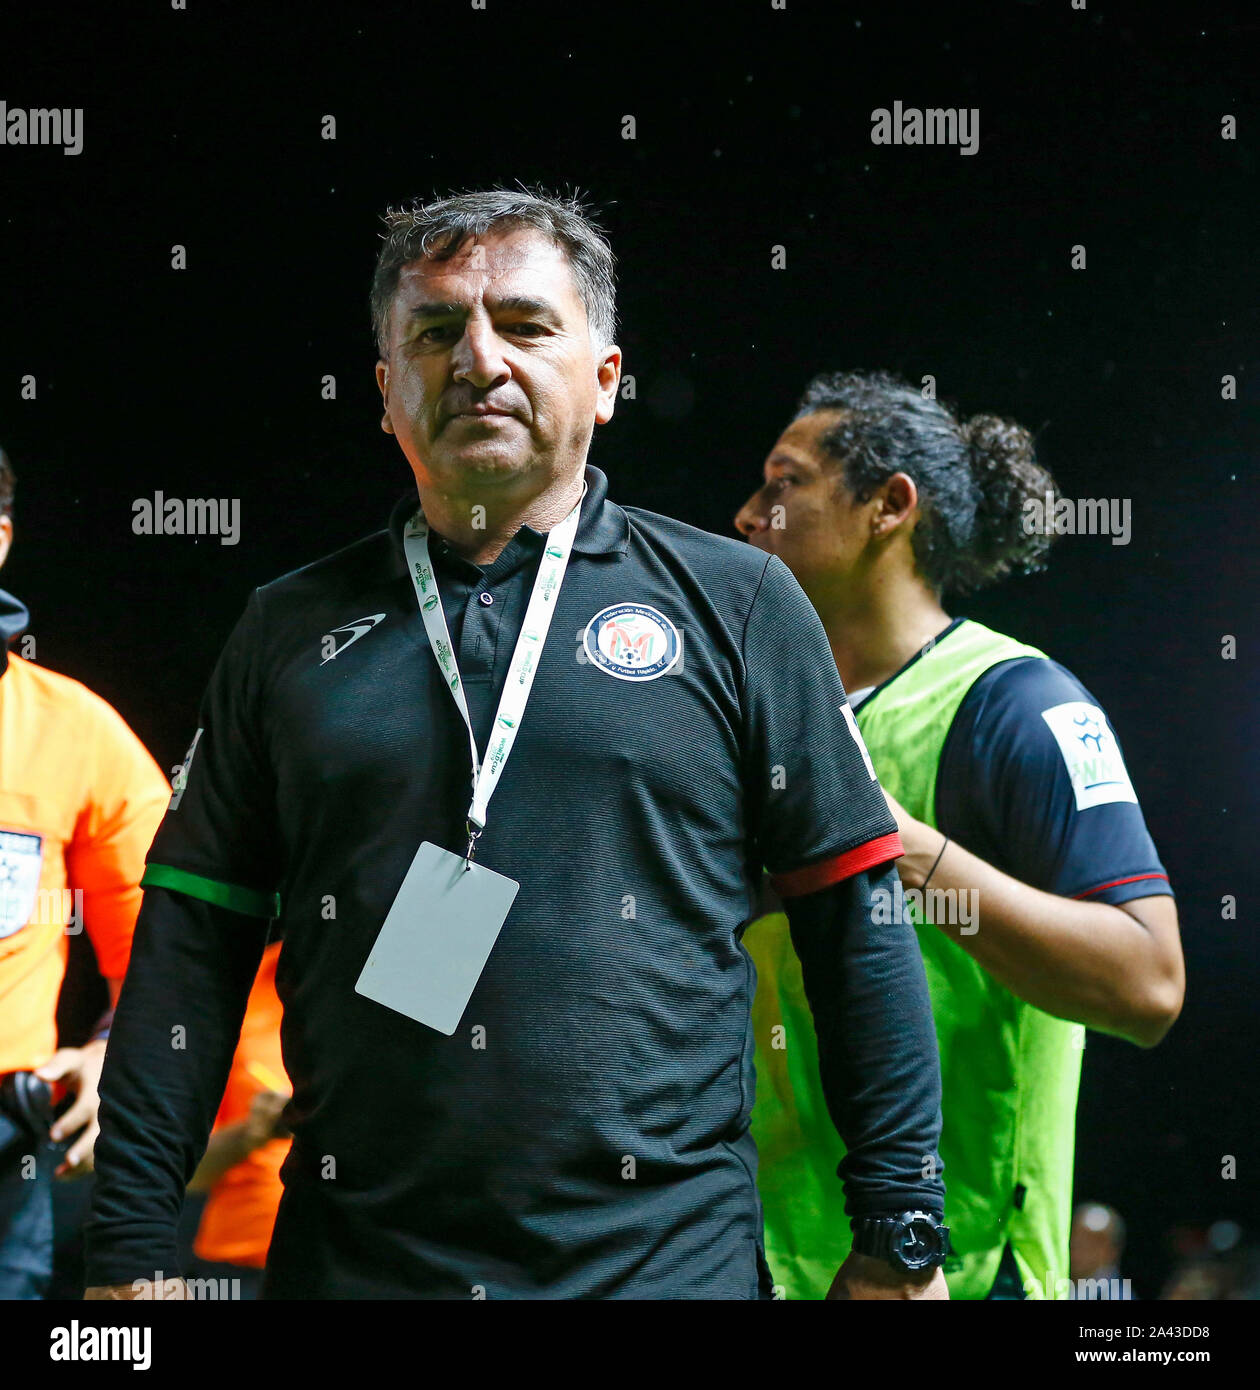 11th October 2019; Langley Park, Perth, Western Australia, Australia; World Mini Football Federation World Cup Final; Mexico versus Brazil, Rene Ortiz Navarro coach of Mexico after receiving a red card from the referee - Editorial Use Stock Photo